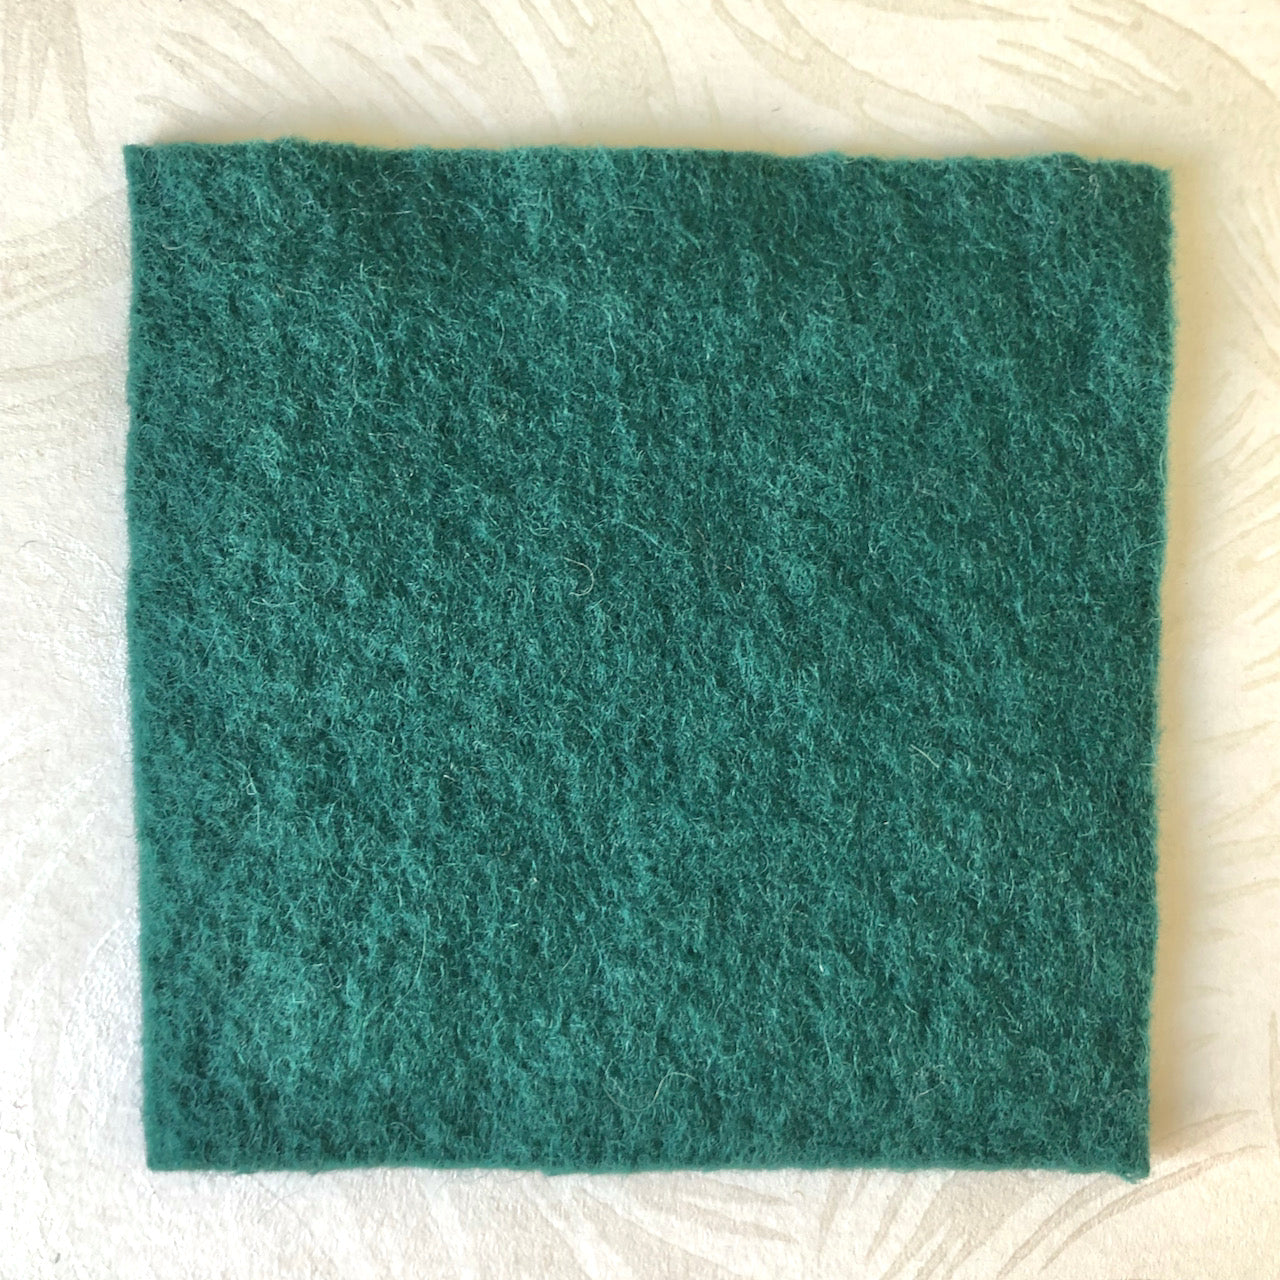 Felted Vintage Woven Wool